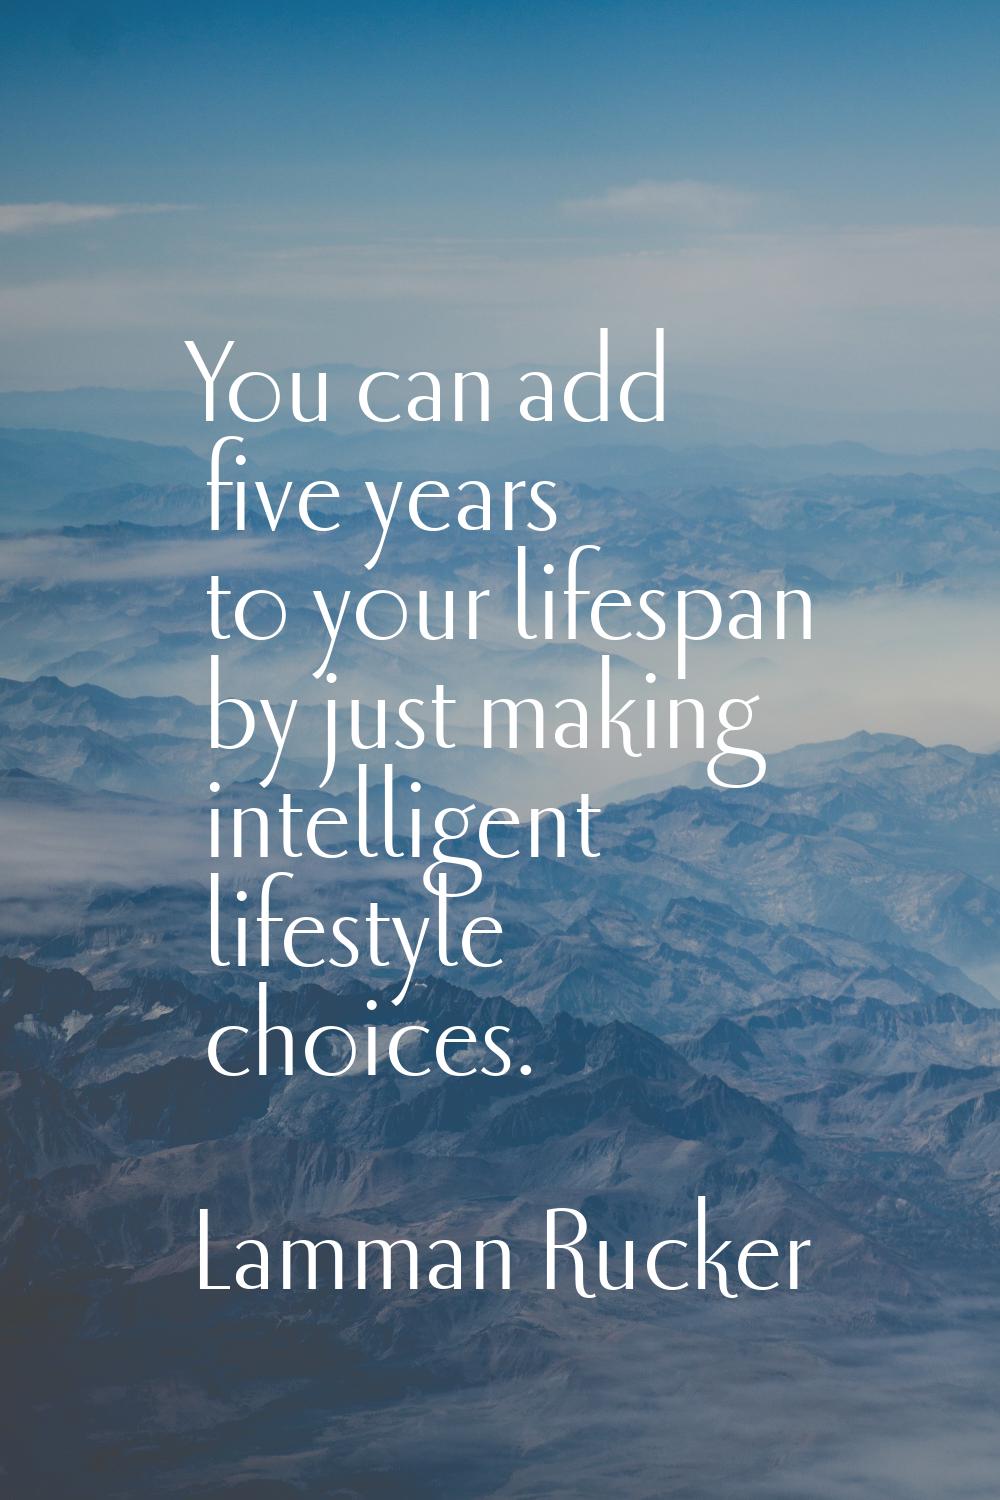 You can add five years to your lifespan by just making intelligent lifestyle choices.